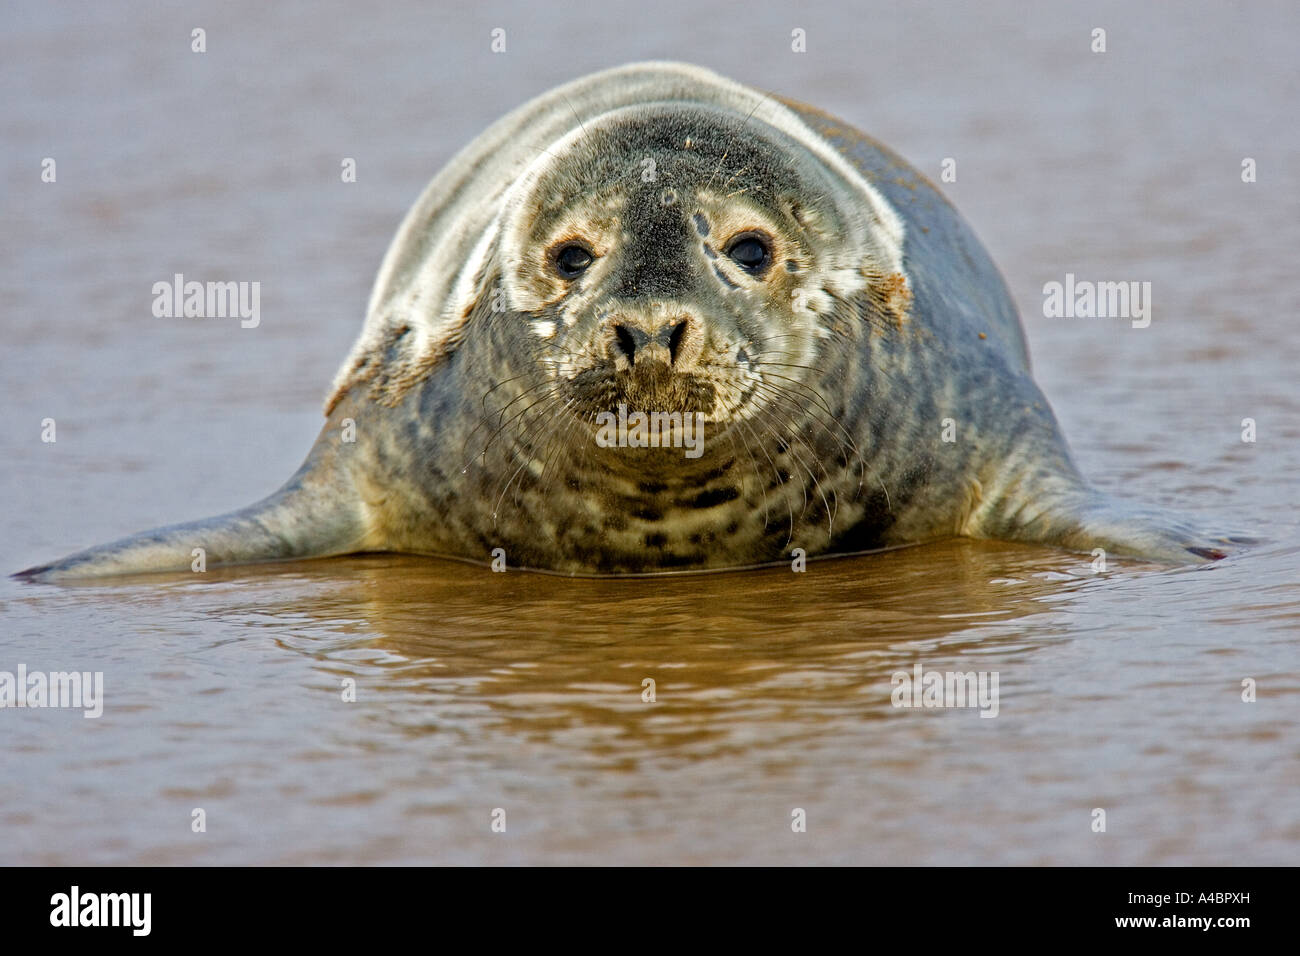 Atlantic Seal on beaches at Donna Nook, Lincolnshire Stock Photo